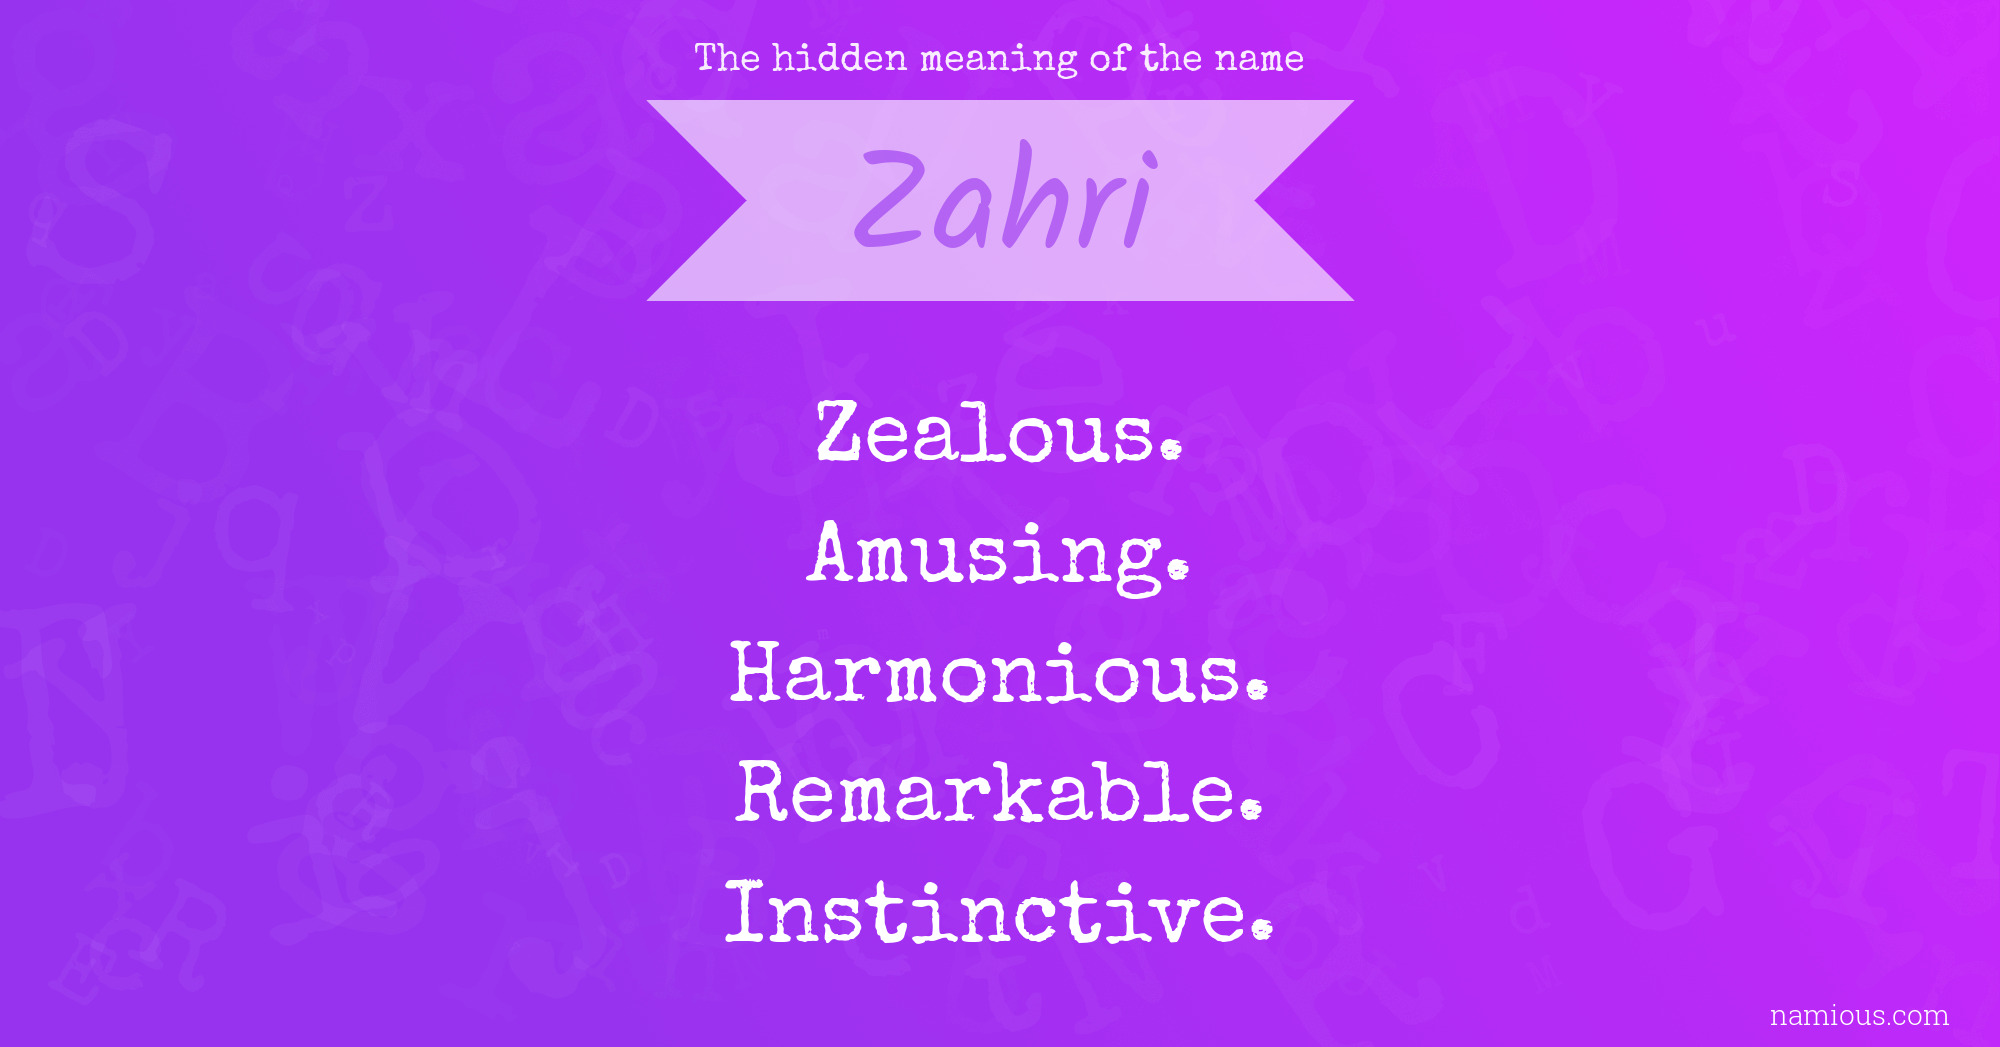 The hidden meaning of the name Zahri